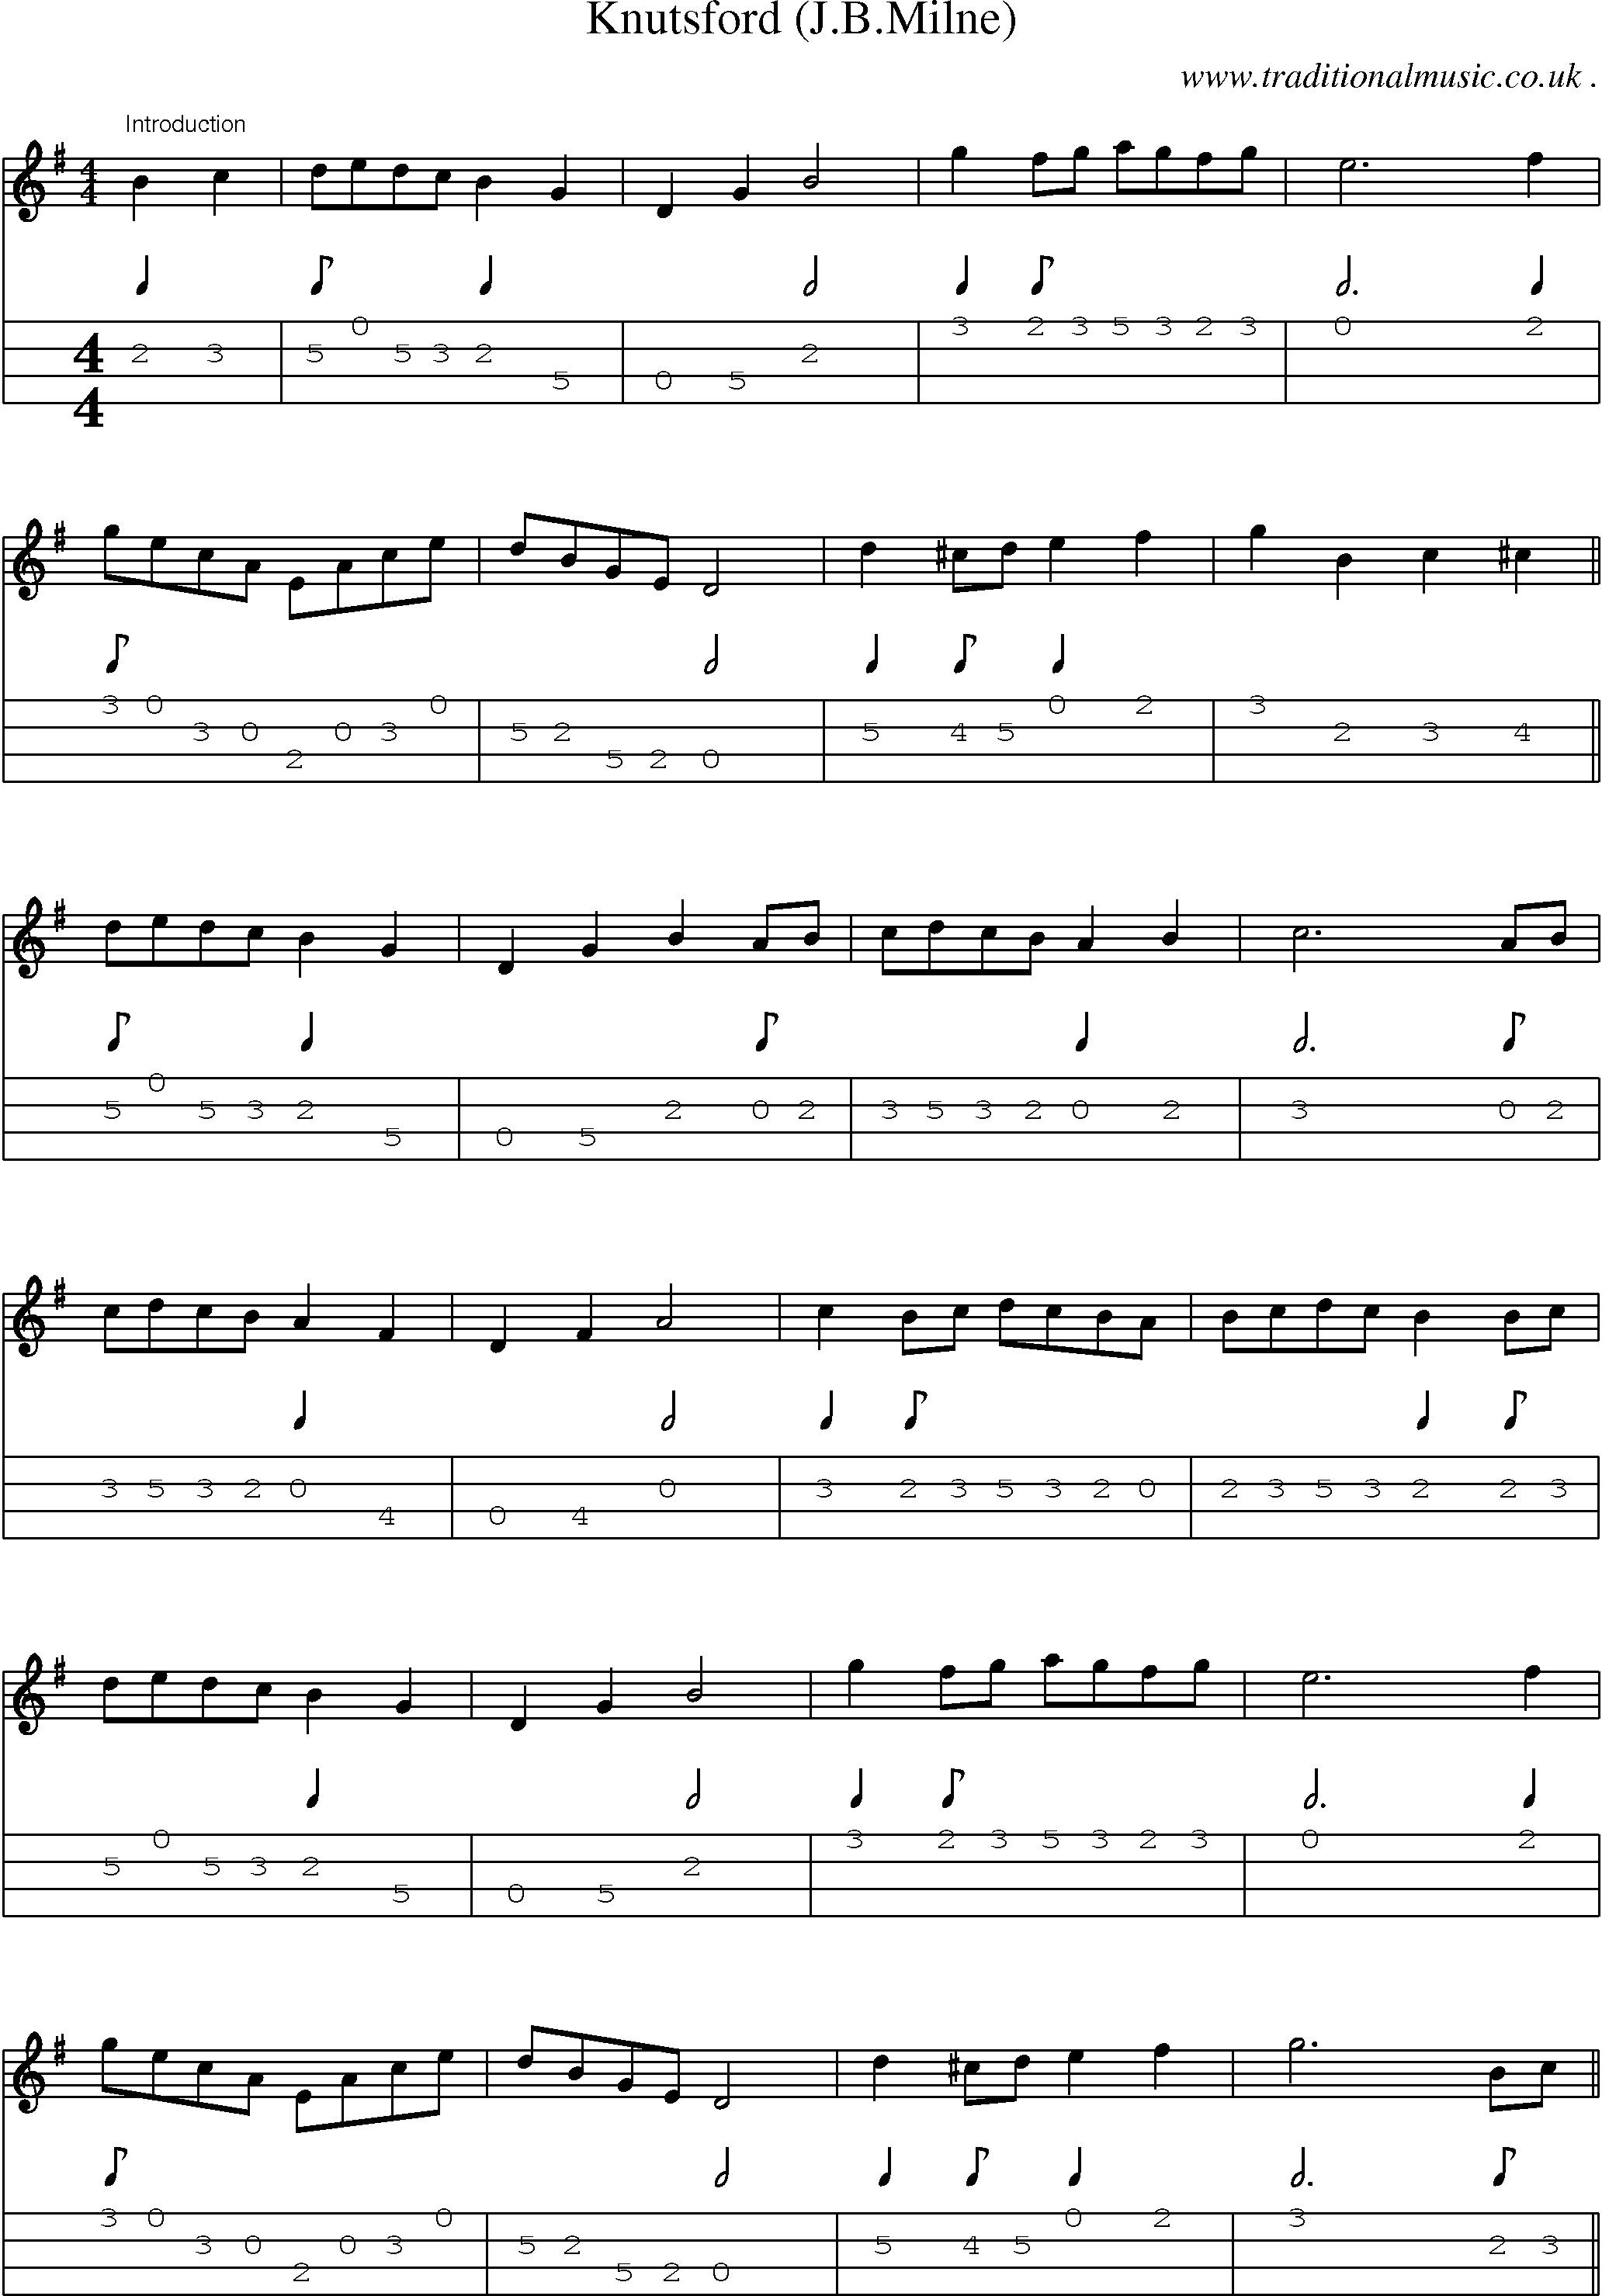 Sheet-Music and Mandolin Tabs for Knutsford (jbmilne)